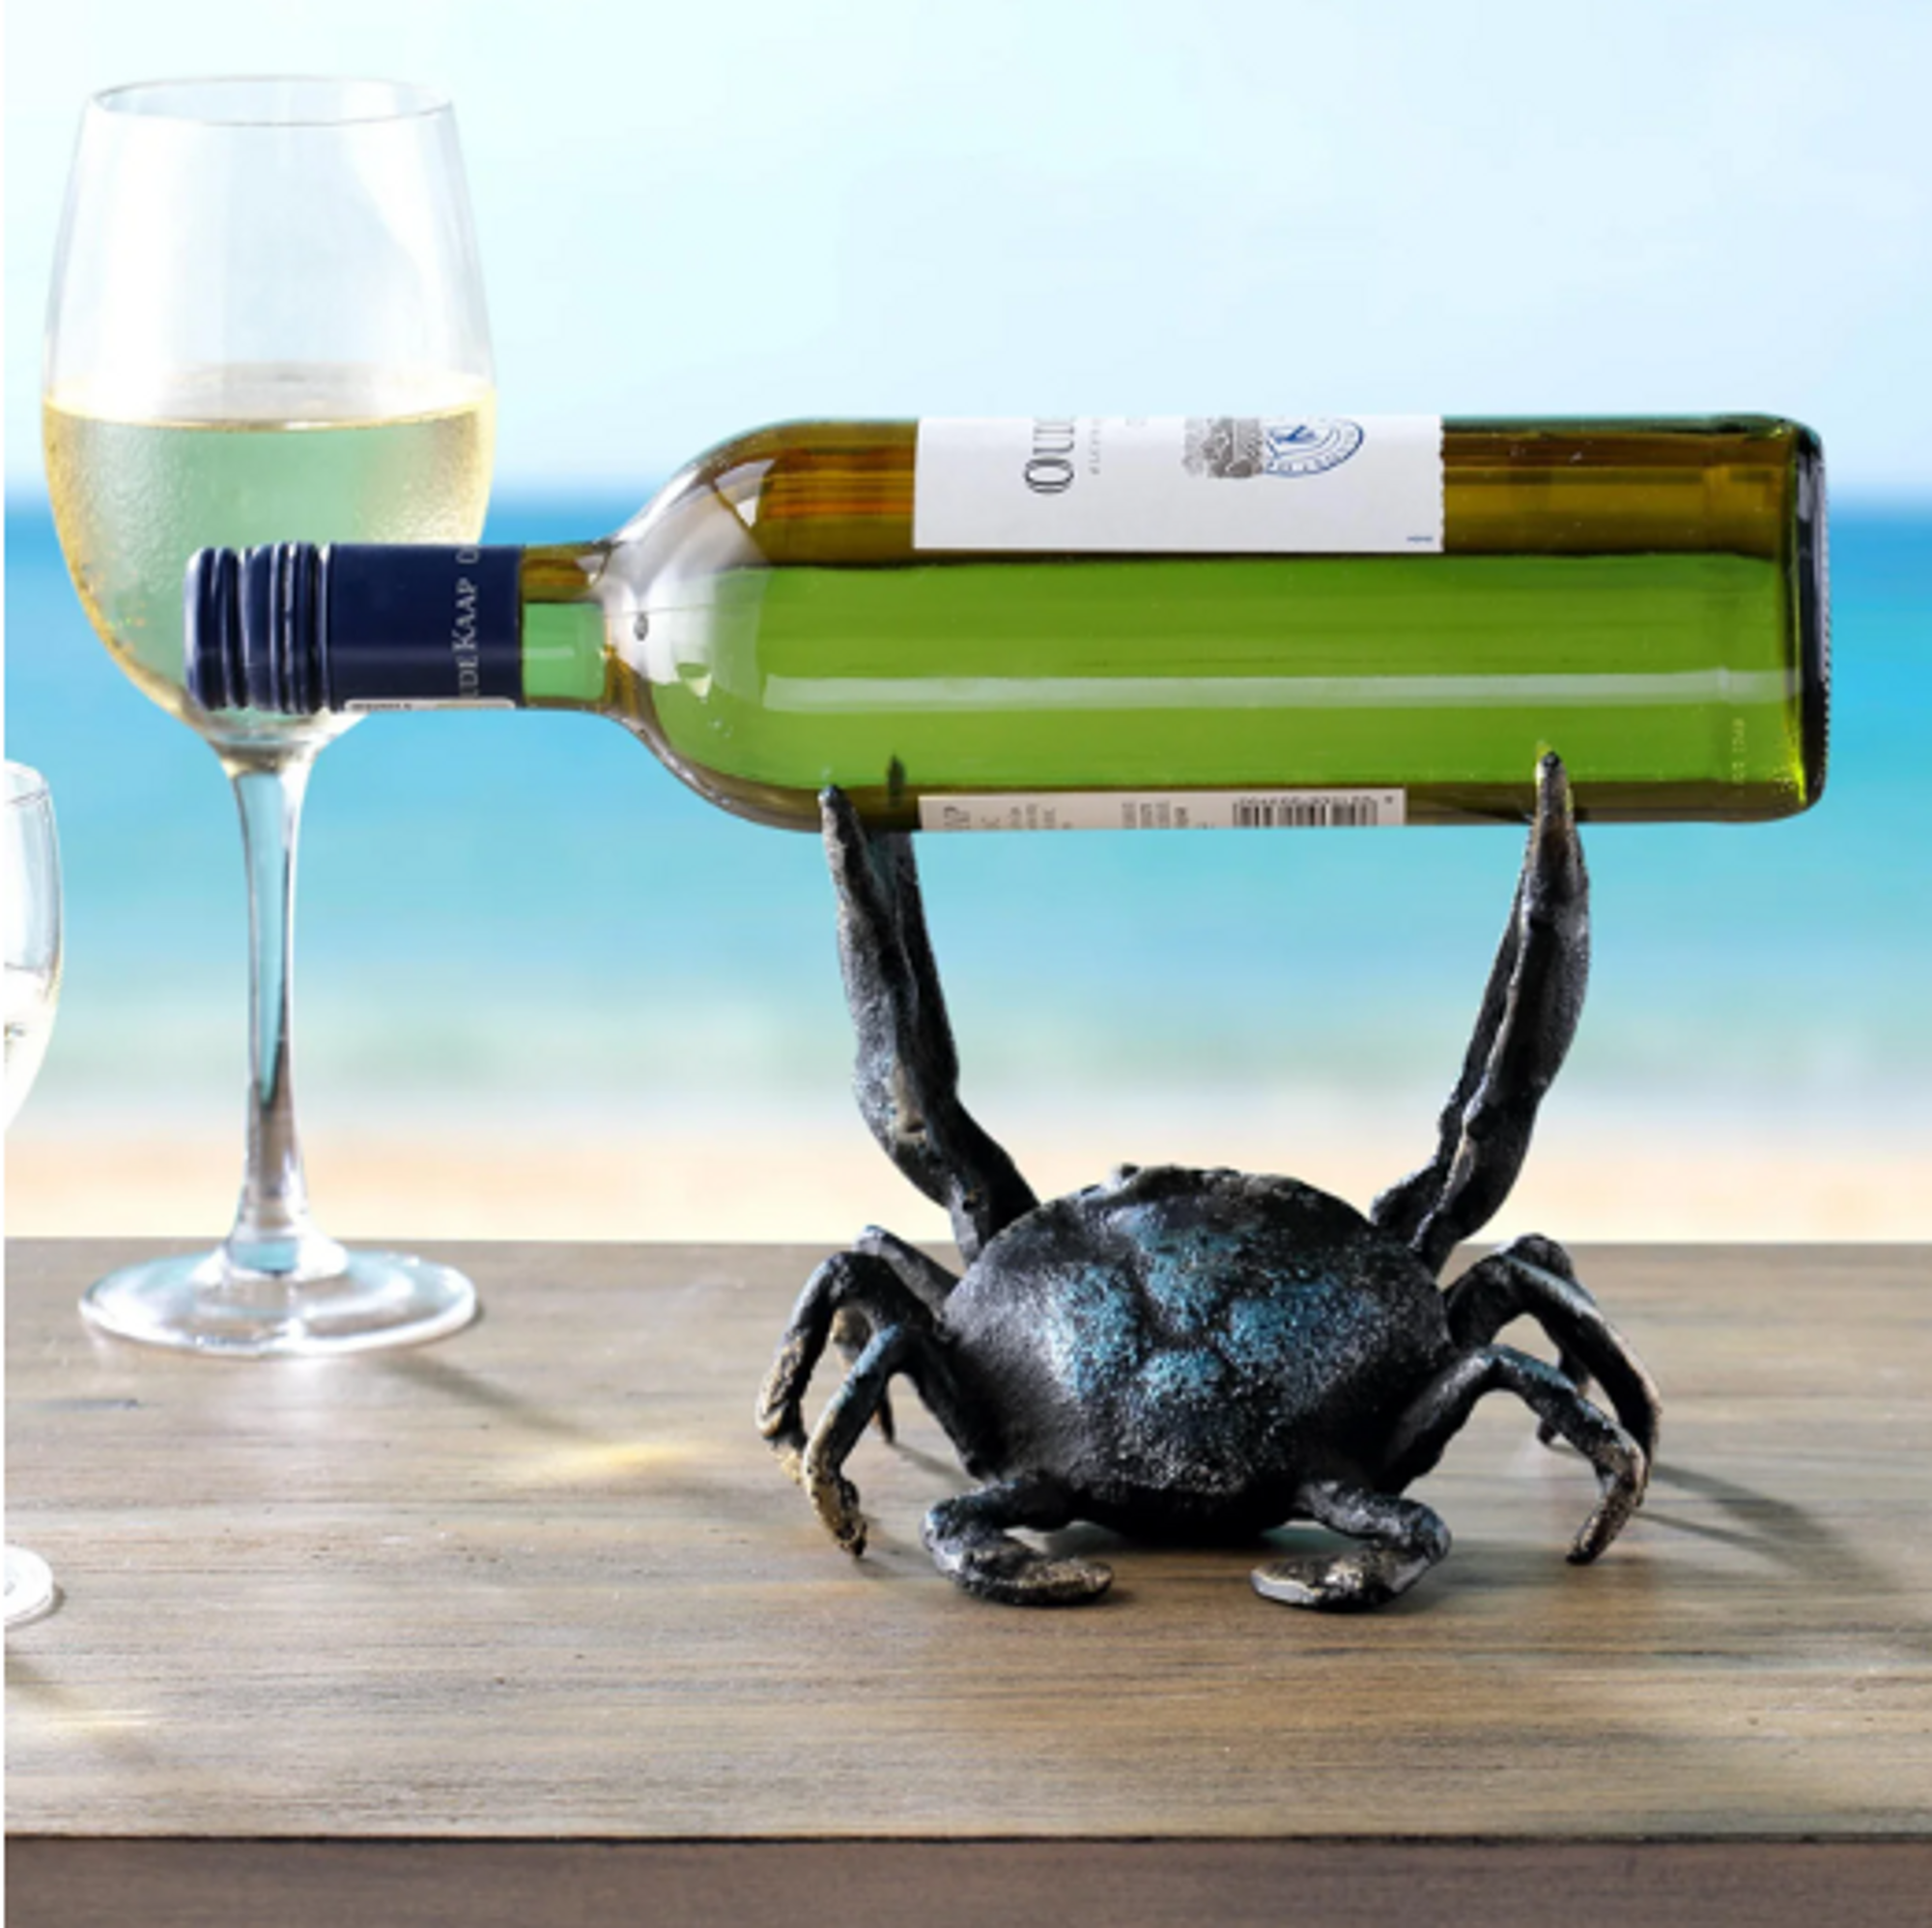 https://cdn11.bigcommerce.com/s-ob7m2s98/images/stencil/2000x2000/products/20791/77632/crab_wine_holder_1__33585.1700099273.png?c=2